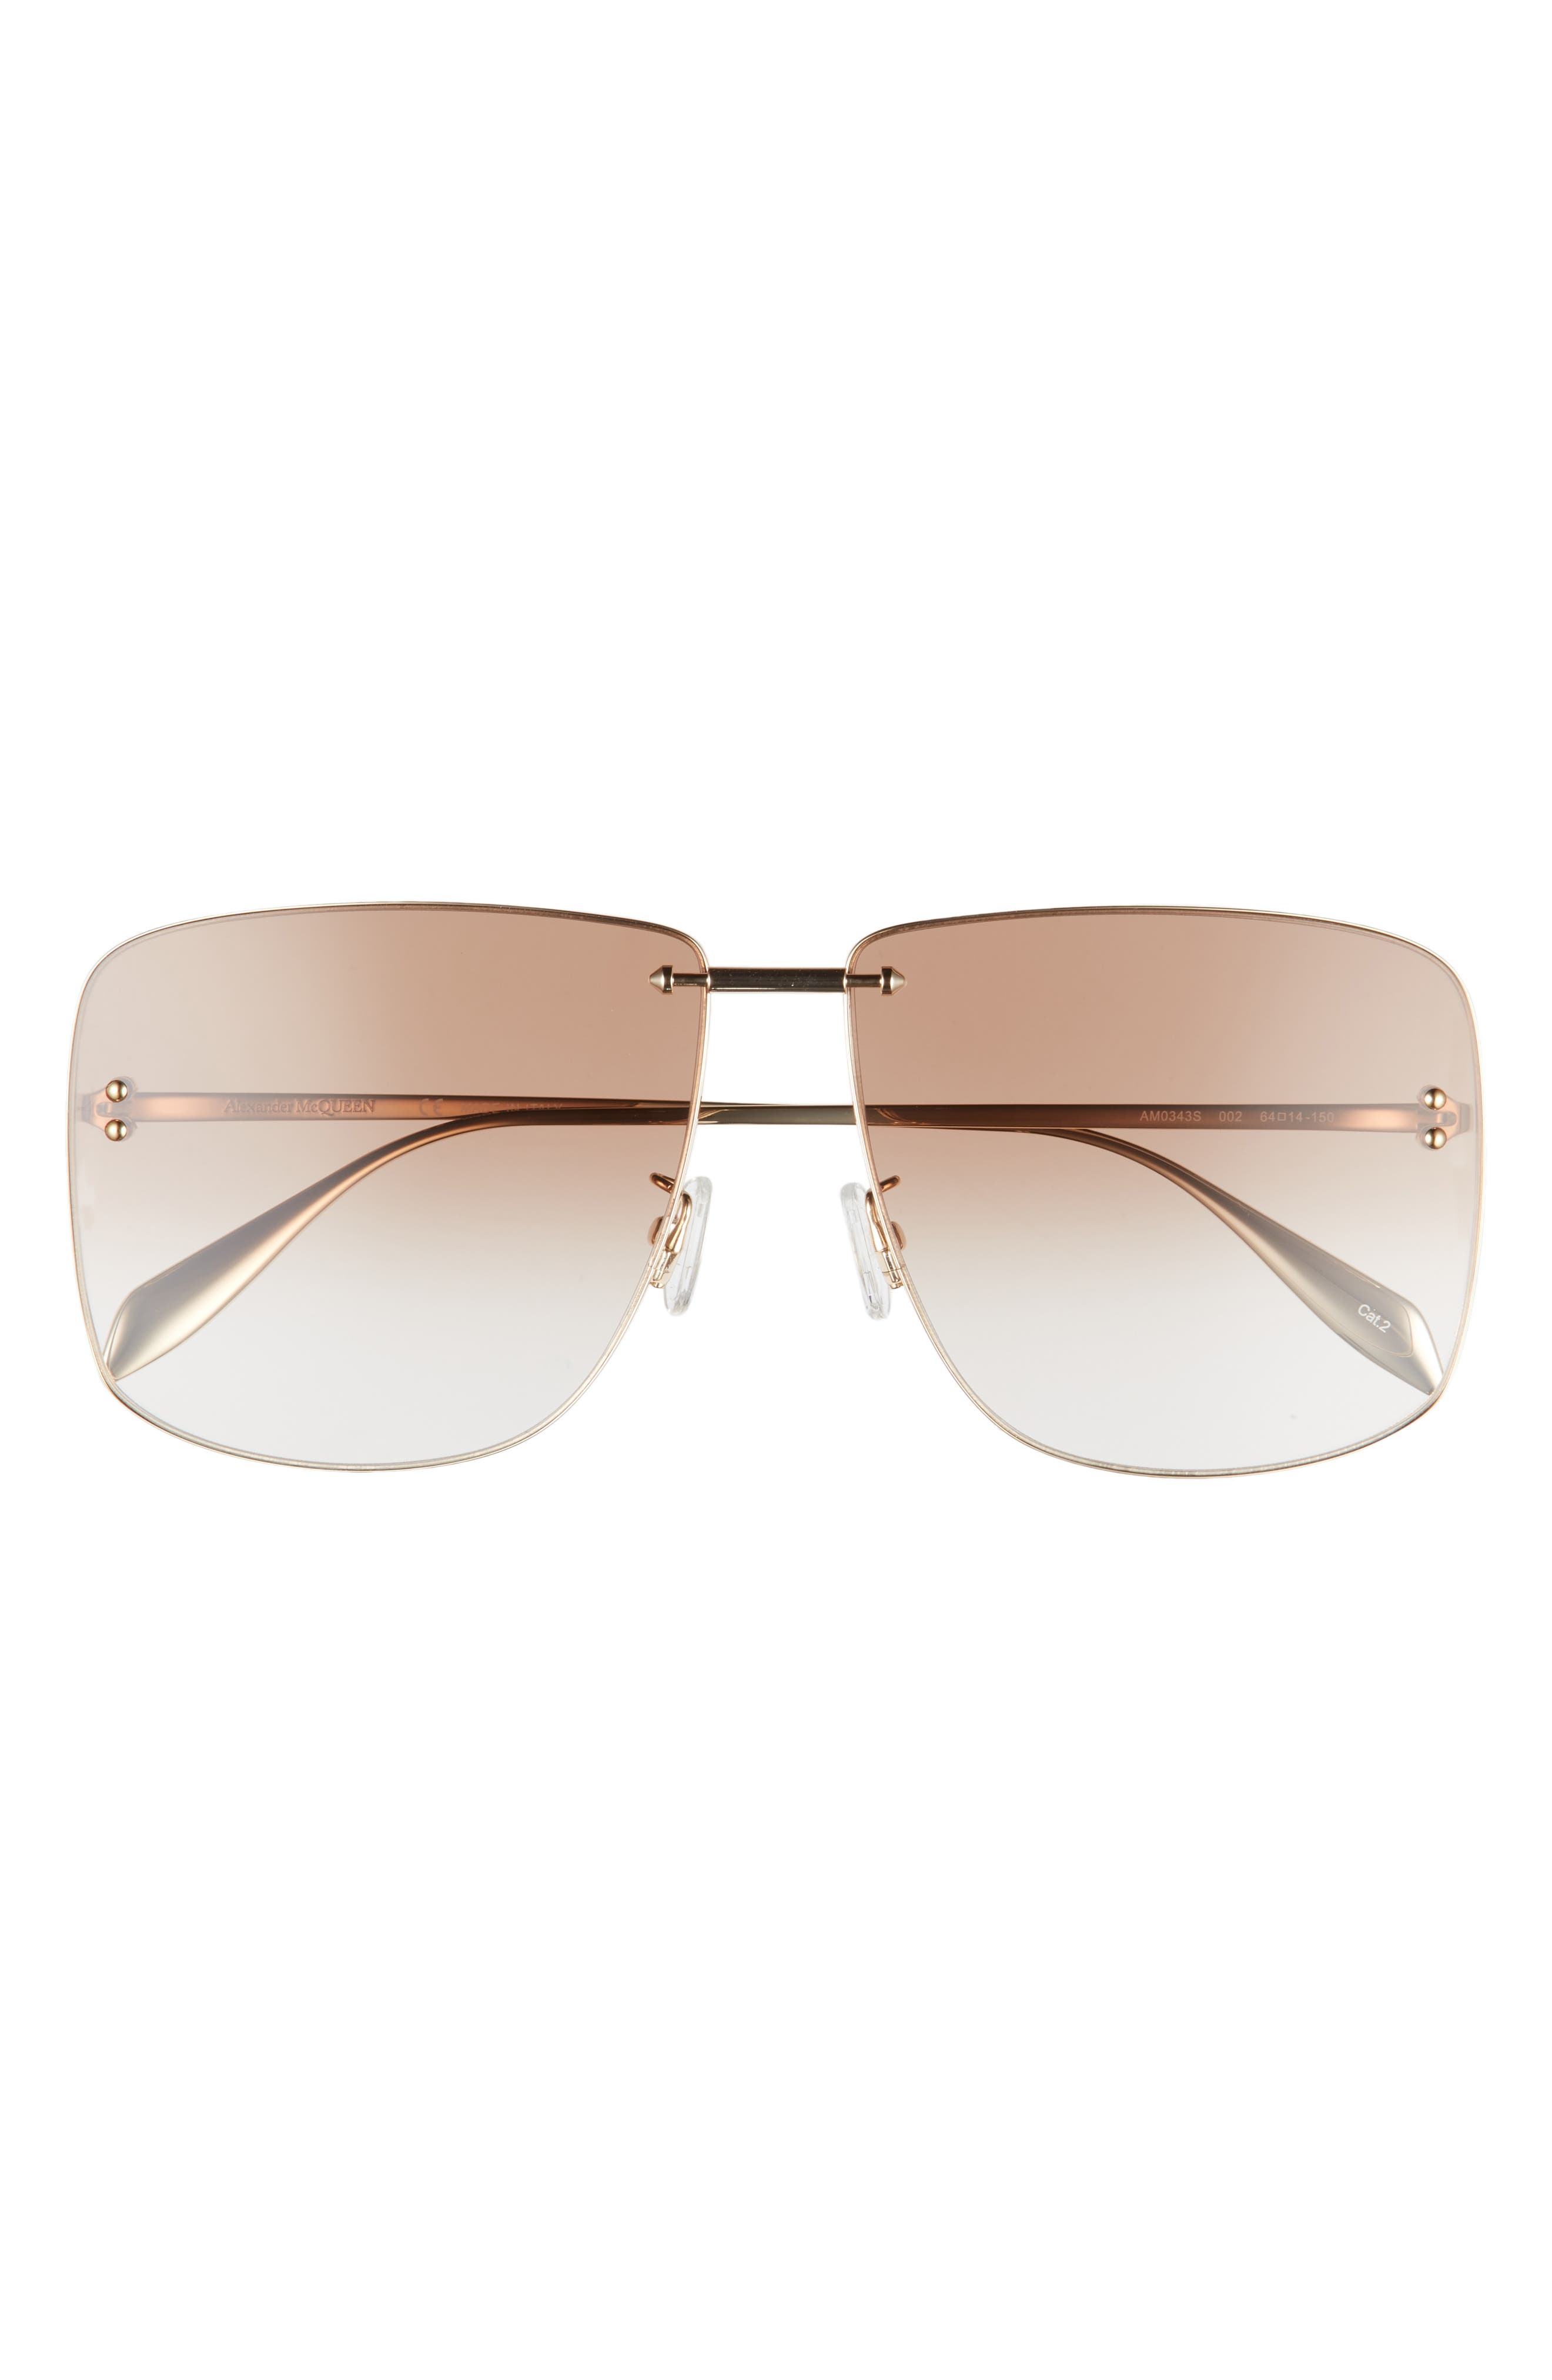 Alexander McQueen 64mm Oversize Square Sunglasses in Gold at Nordstrom